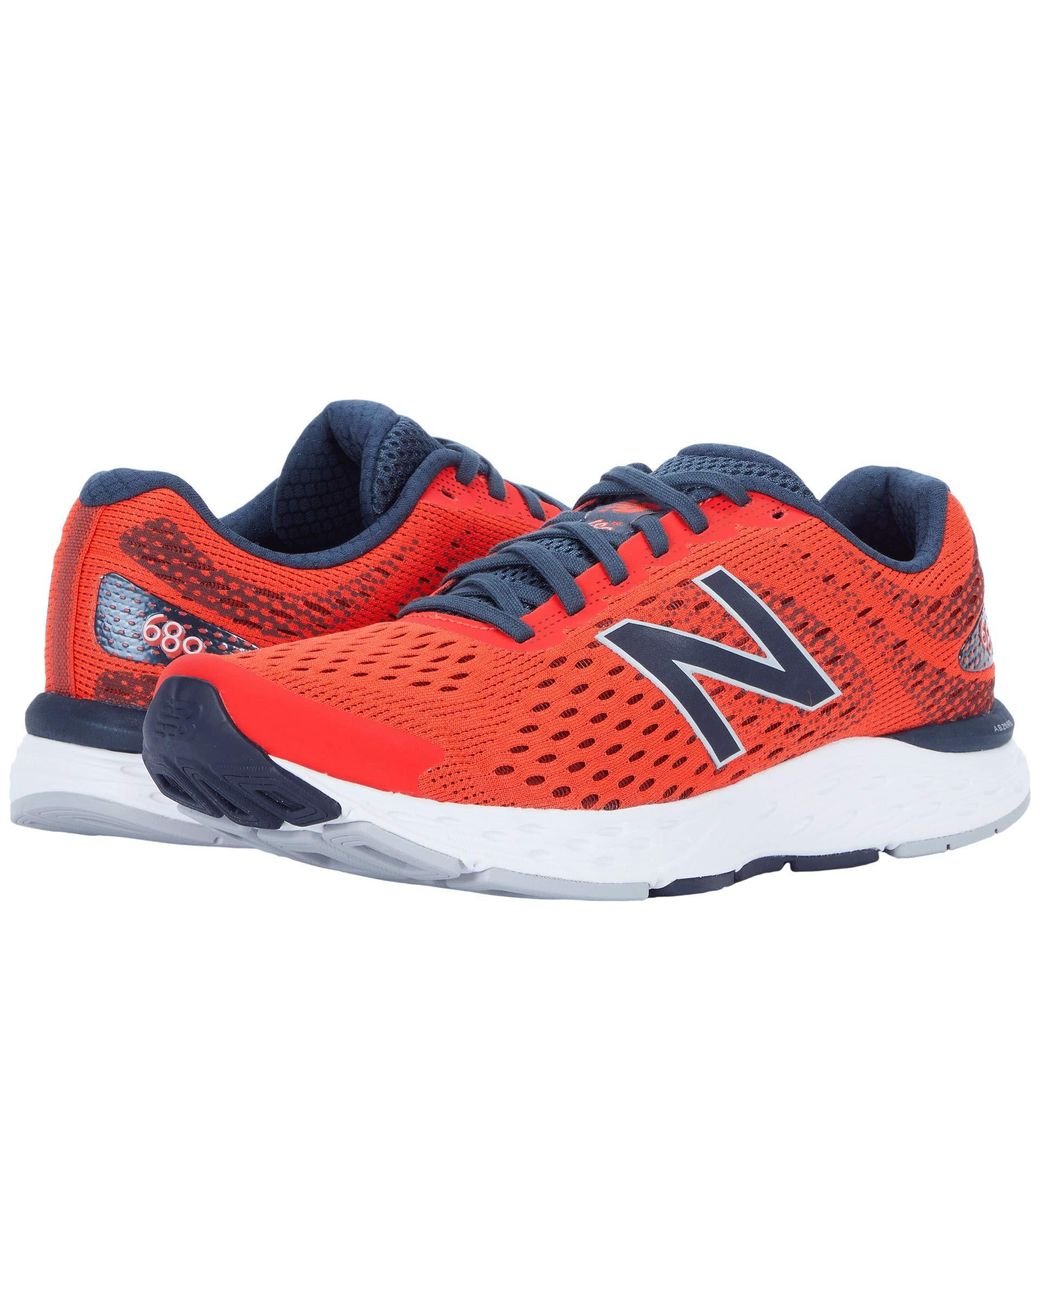 New Balance Synthetic 680v6 Running Shoes in Red (Blue) for Men - Lyst